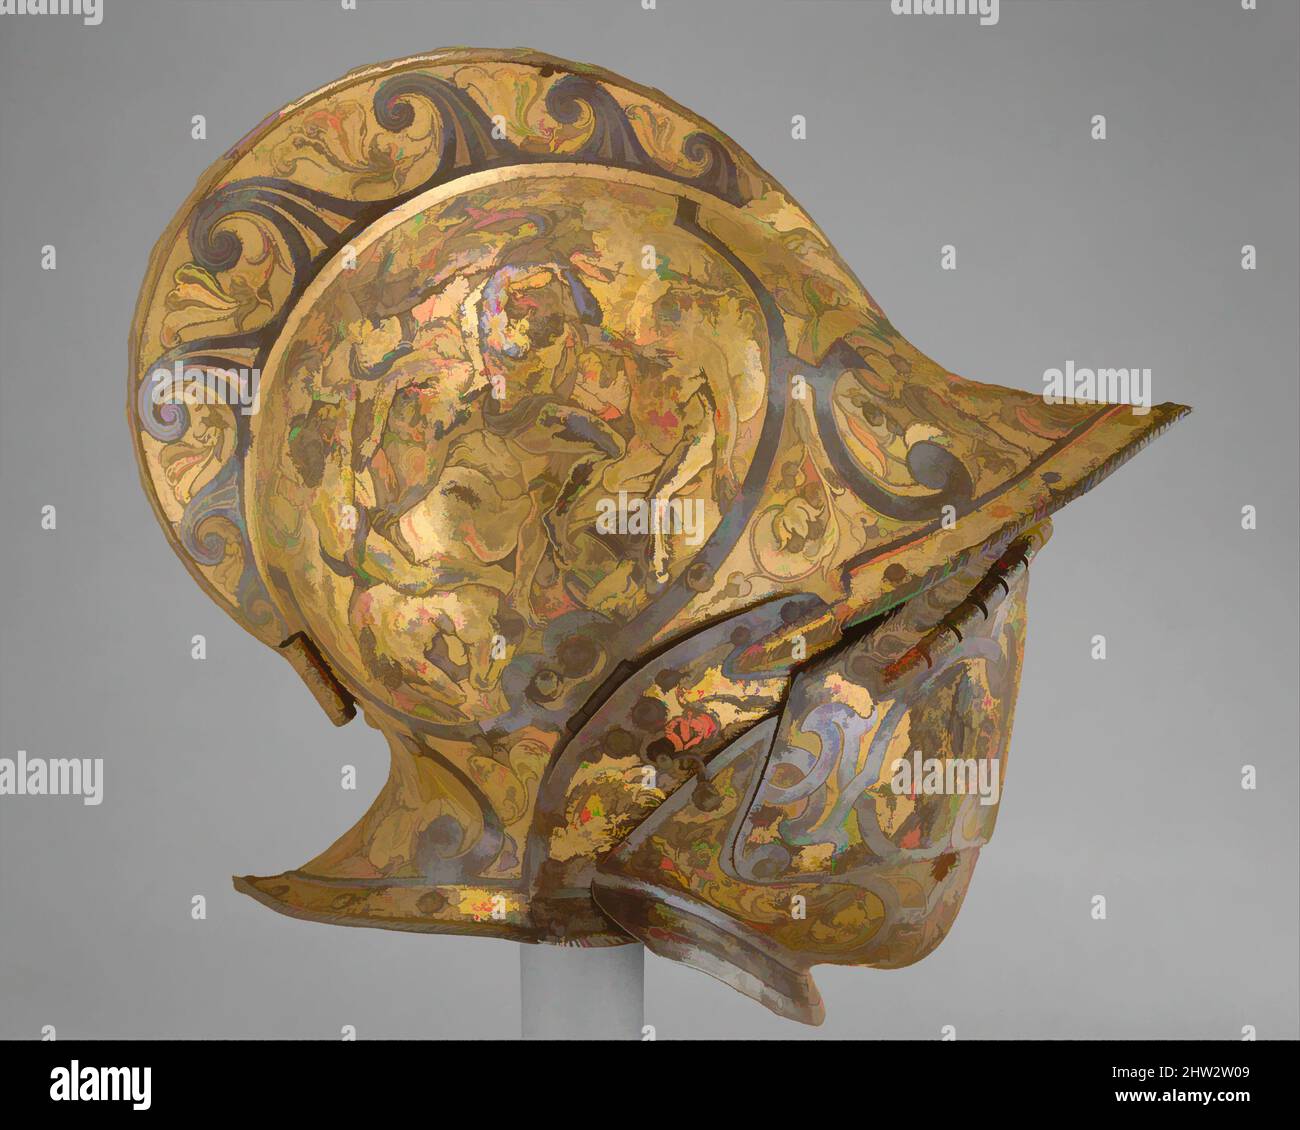 Art inspired by Buffe, ca. 1550, French, Steel, gold, H. 8 7/8 in. (22.5 cm); W. 7 1/4 in. (18.4 cm); D. 4 3/4 in. (12.1 cm); Wt. without burgonet 1 lb. 2 oz. (499 g), Helmets Parts, This buffe belongs to a burgonet. The medallions on either side of the helmet bowl are embossed with, Classic works modernized by Artotop with a splash of modernity. Shapes, color and value, eye-catching visual impact on art. Emotions through freedom of artworks in a contemporary way. A timeless message pursuing a wildly creative new direction. Artists turning to the digital medium and creating the Artotop NFT Stock Photo